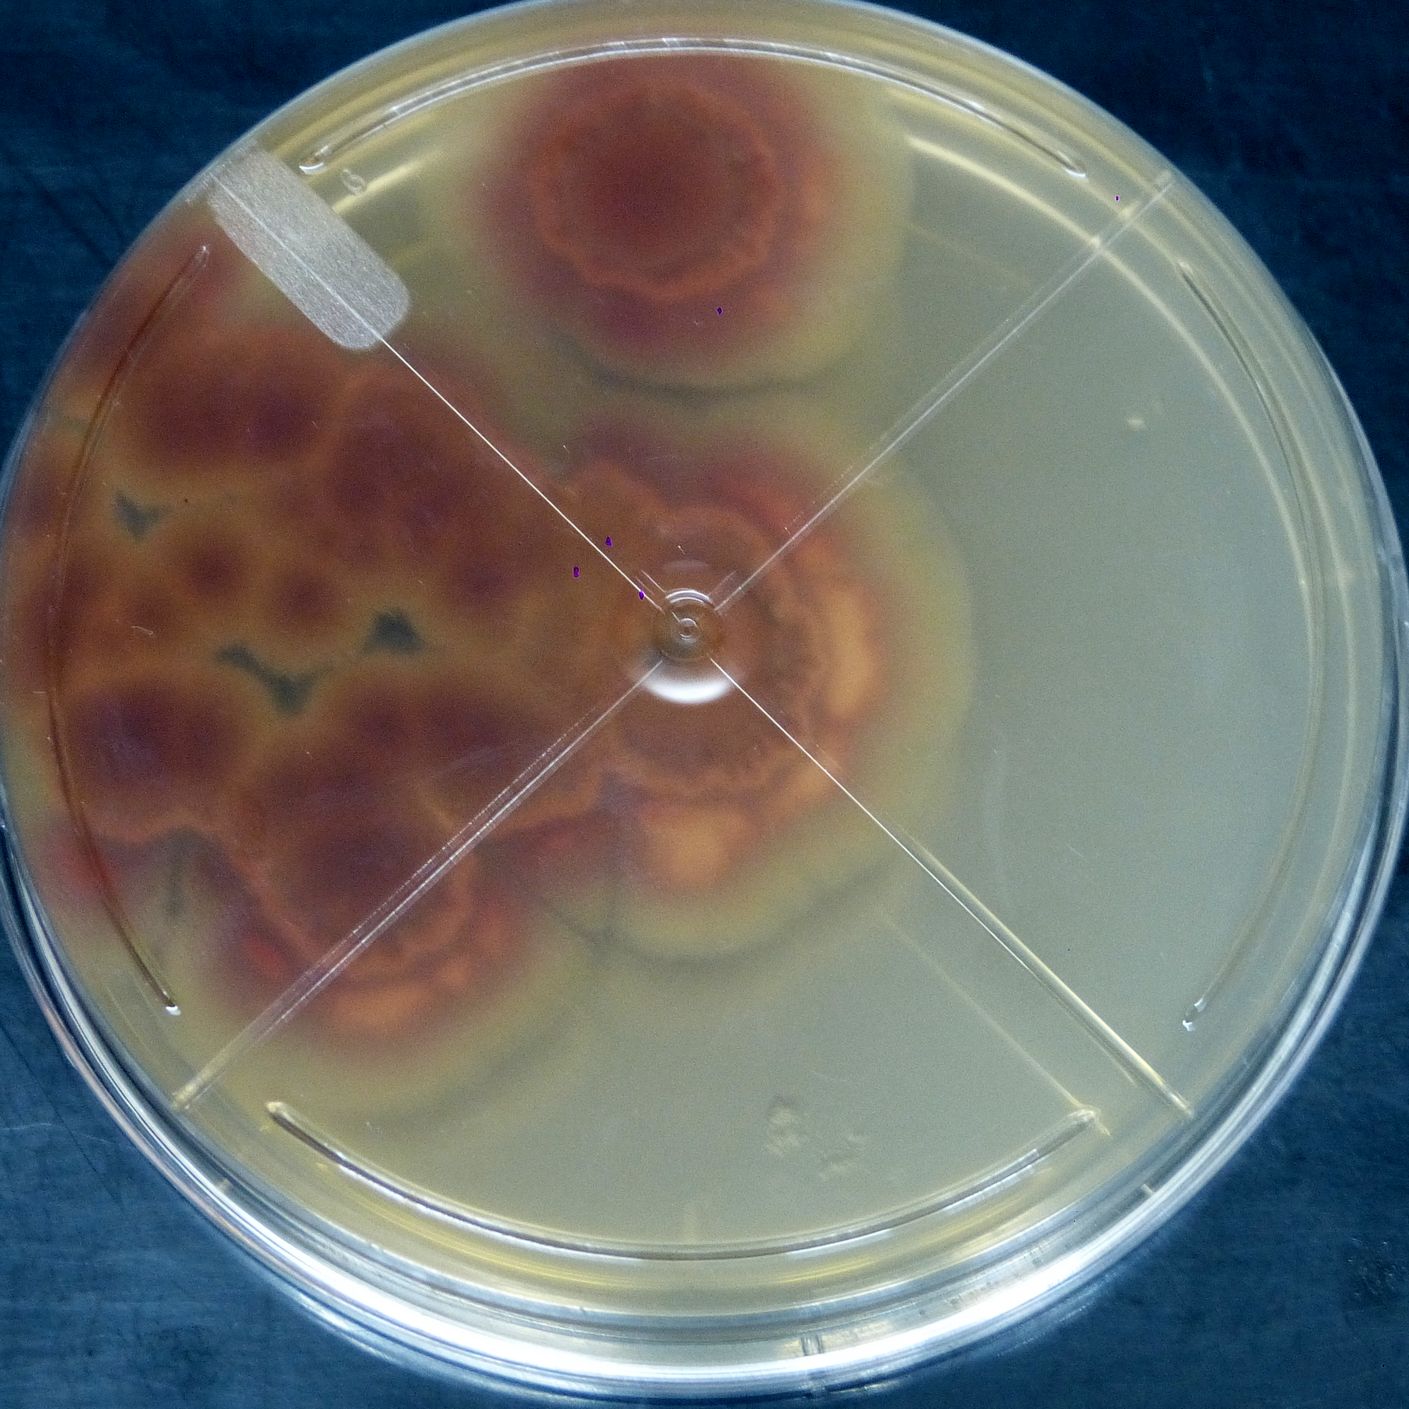 microbial-collection-11